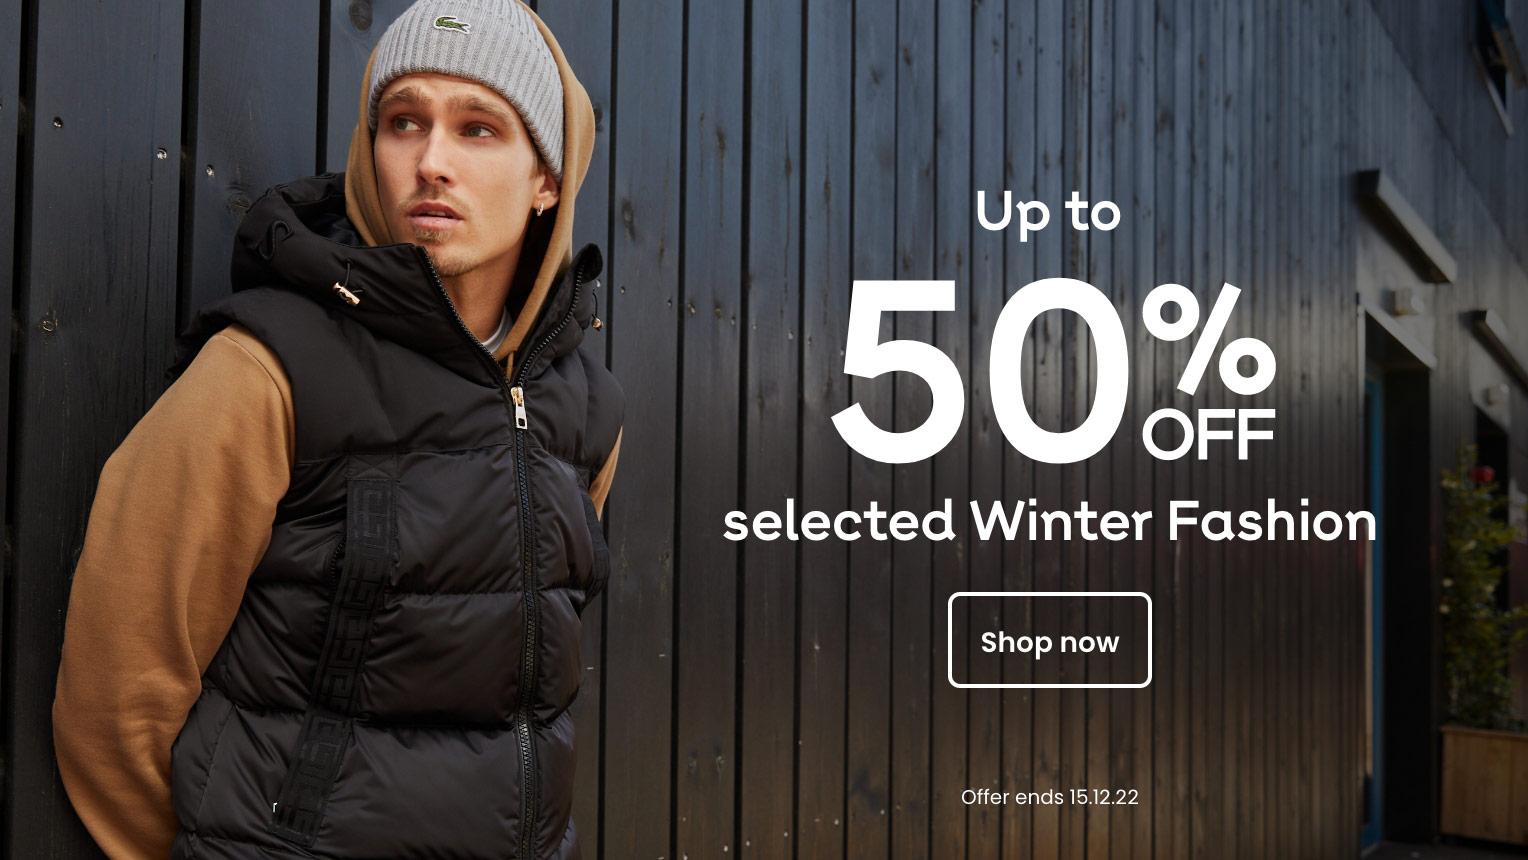 Up to 50% off selected Winter Fashion